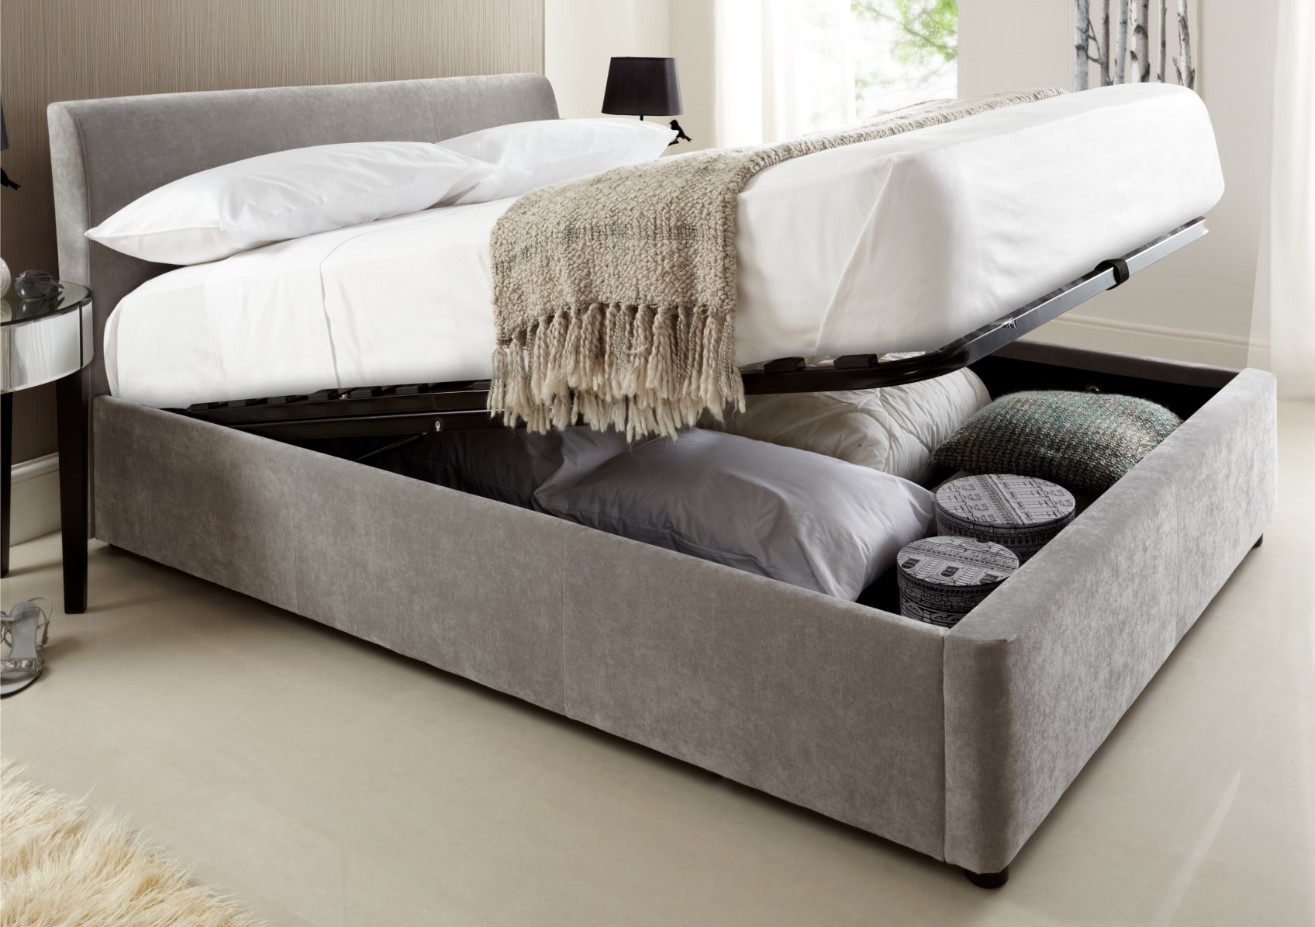 storage bed frame in gray